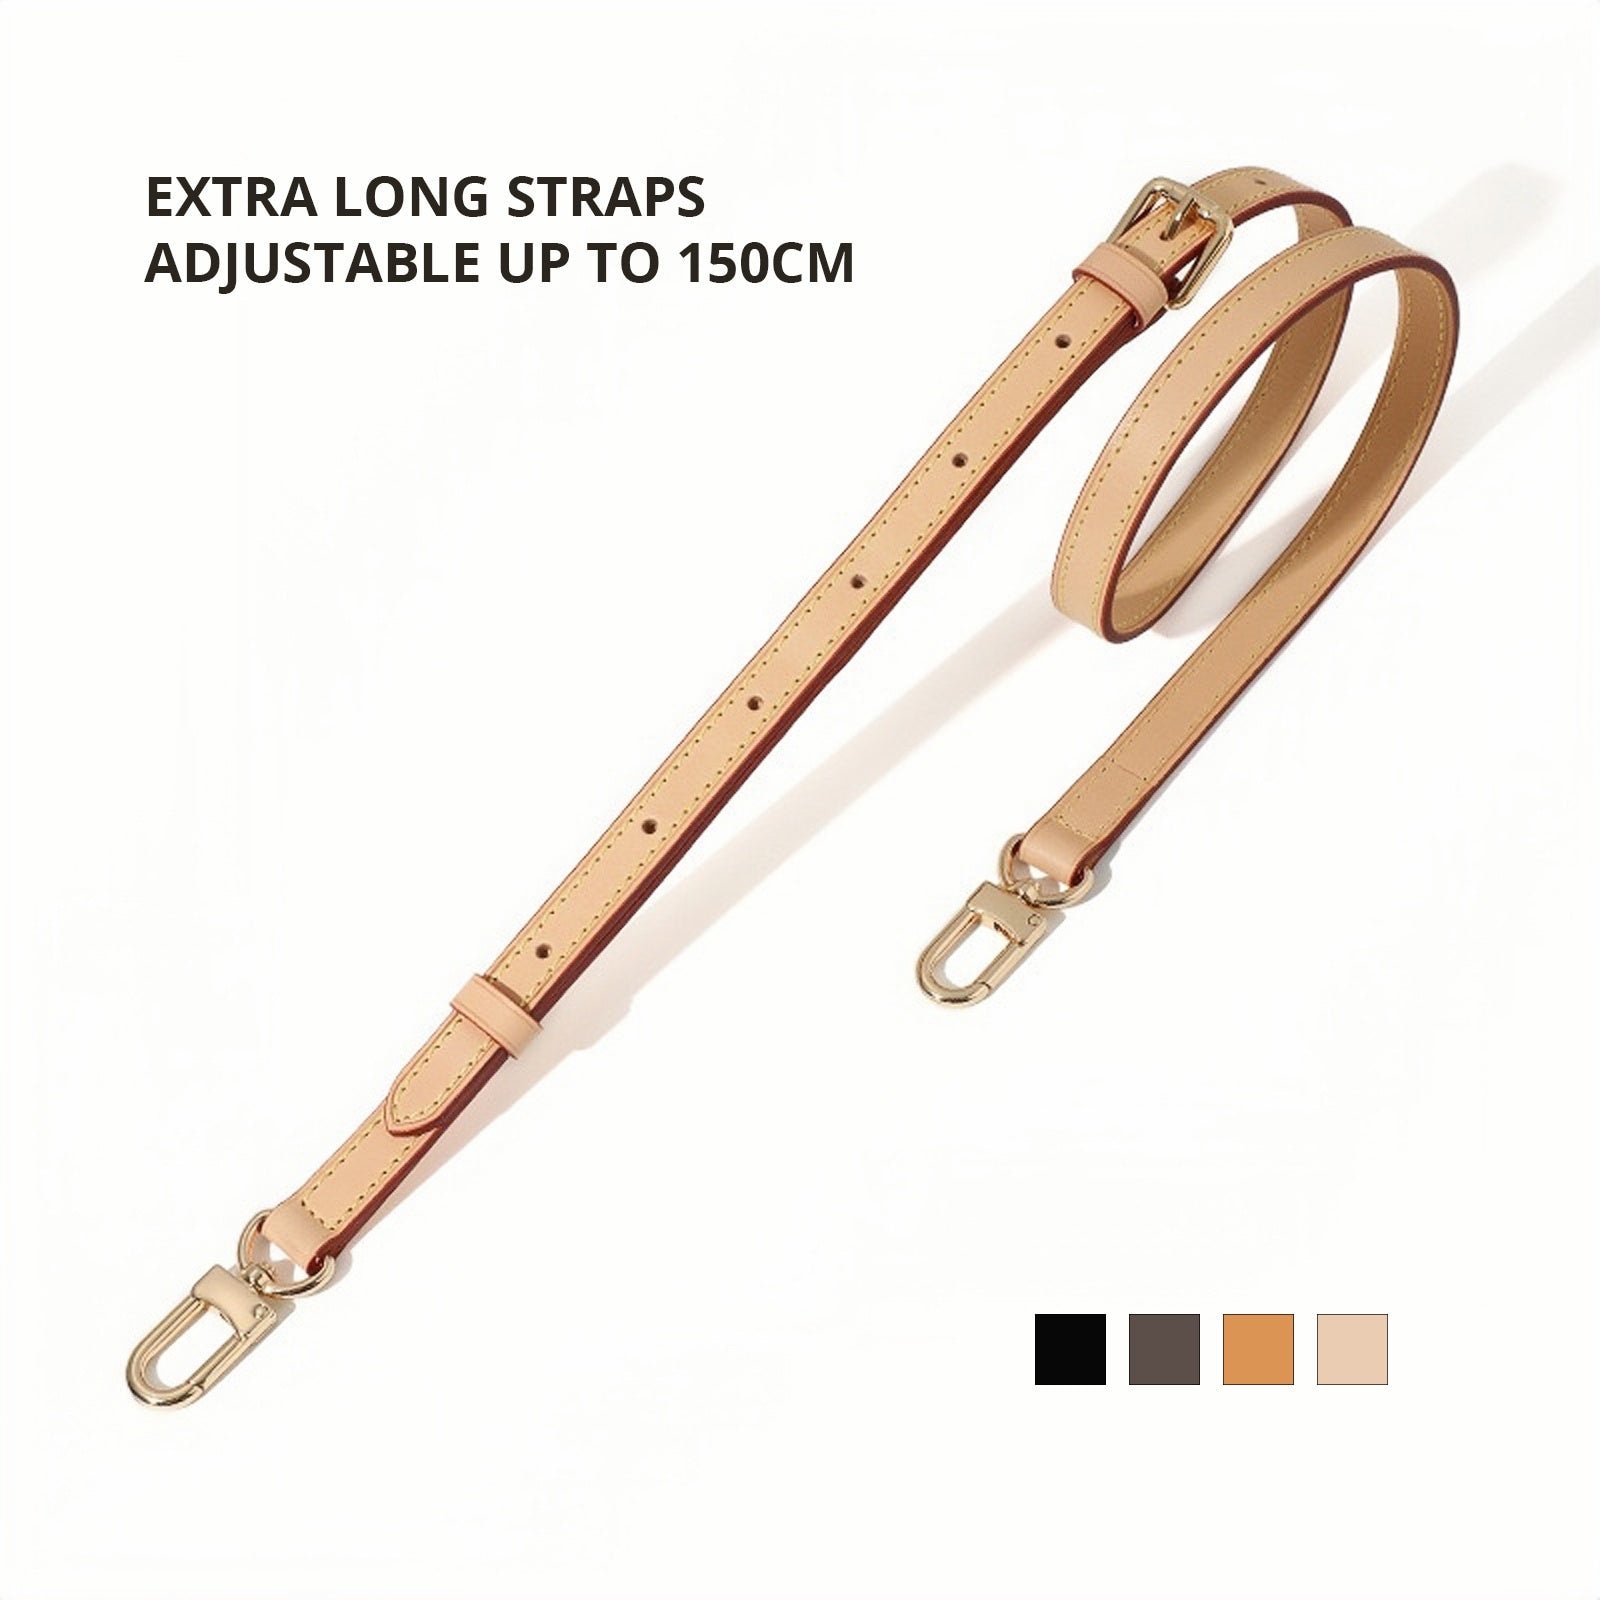 Adjustable Leather Straps DIY Conversion Kits for Longchamp Pouches and  Handbags 